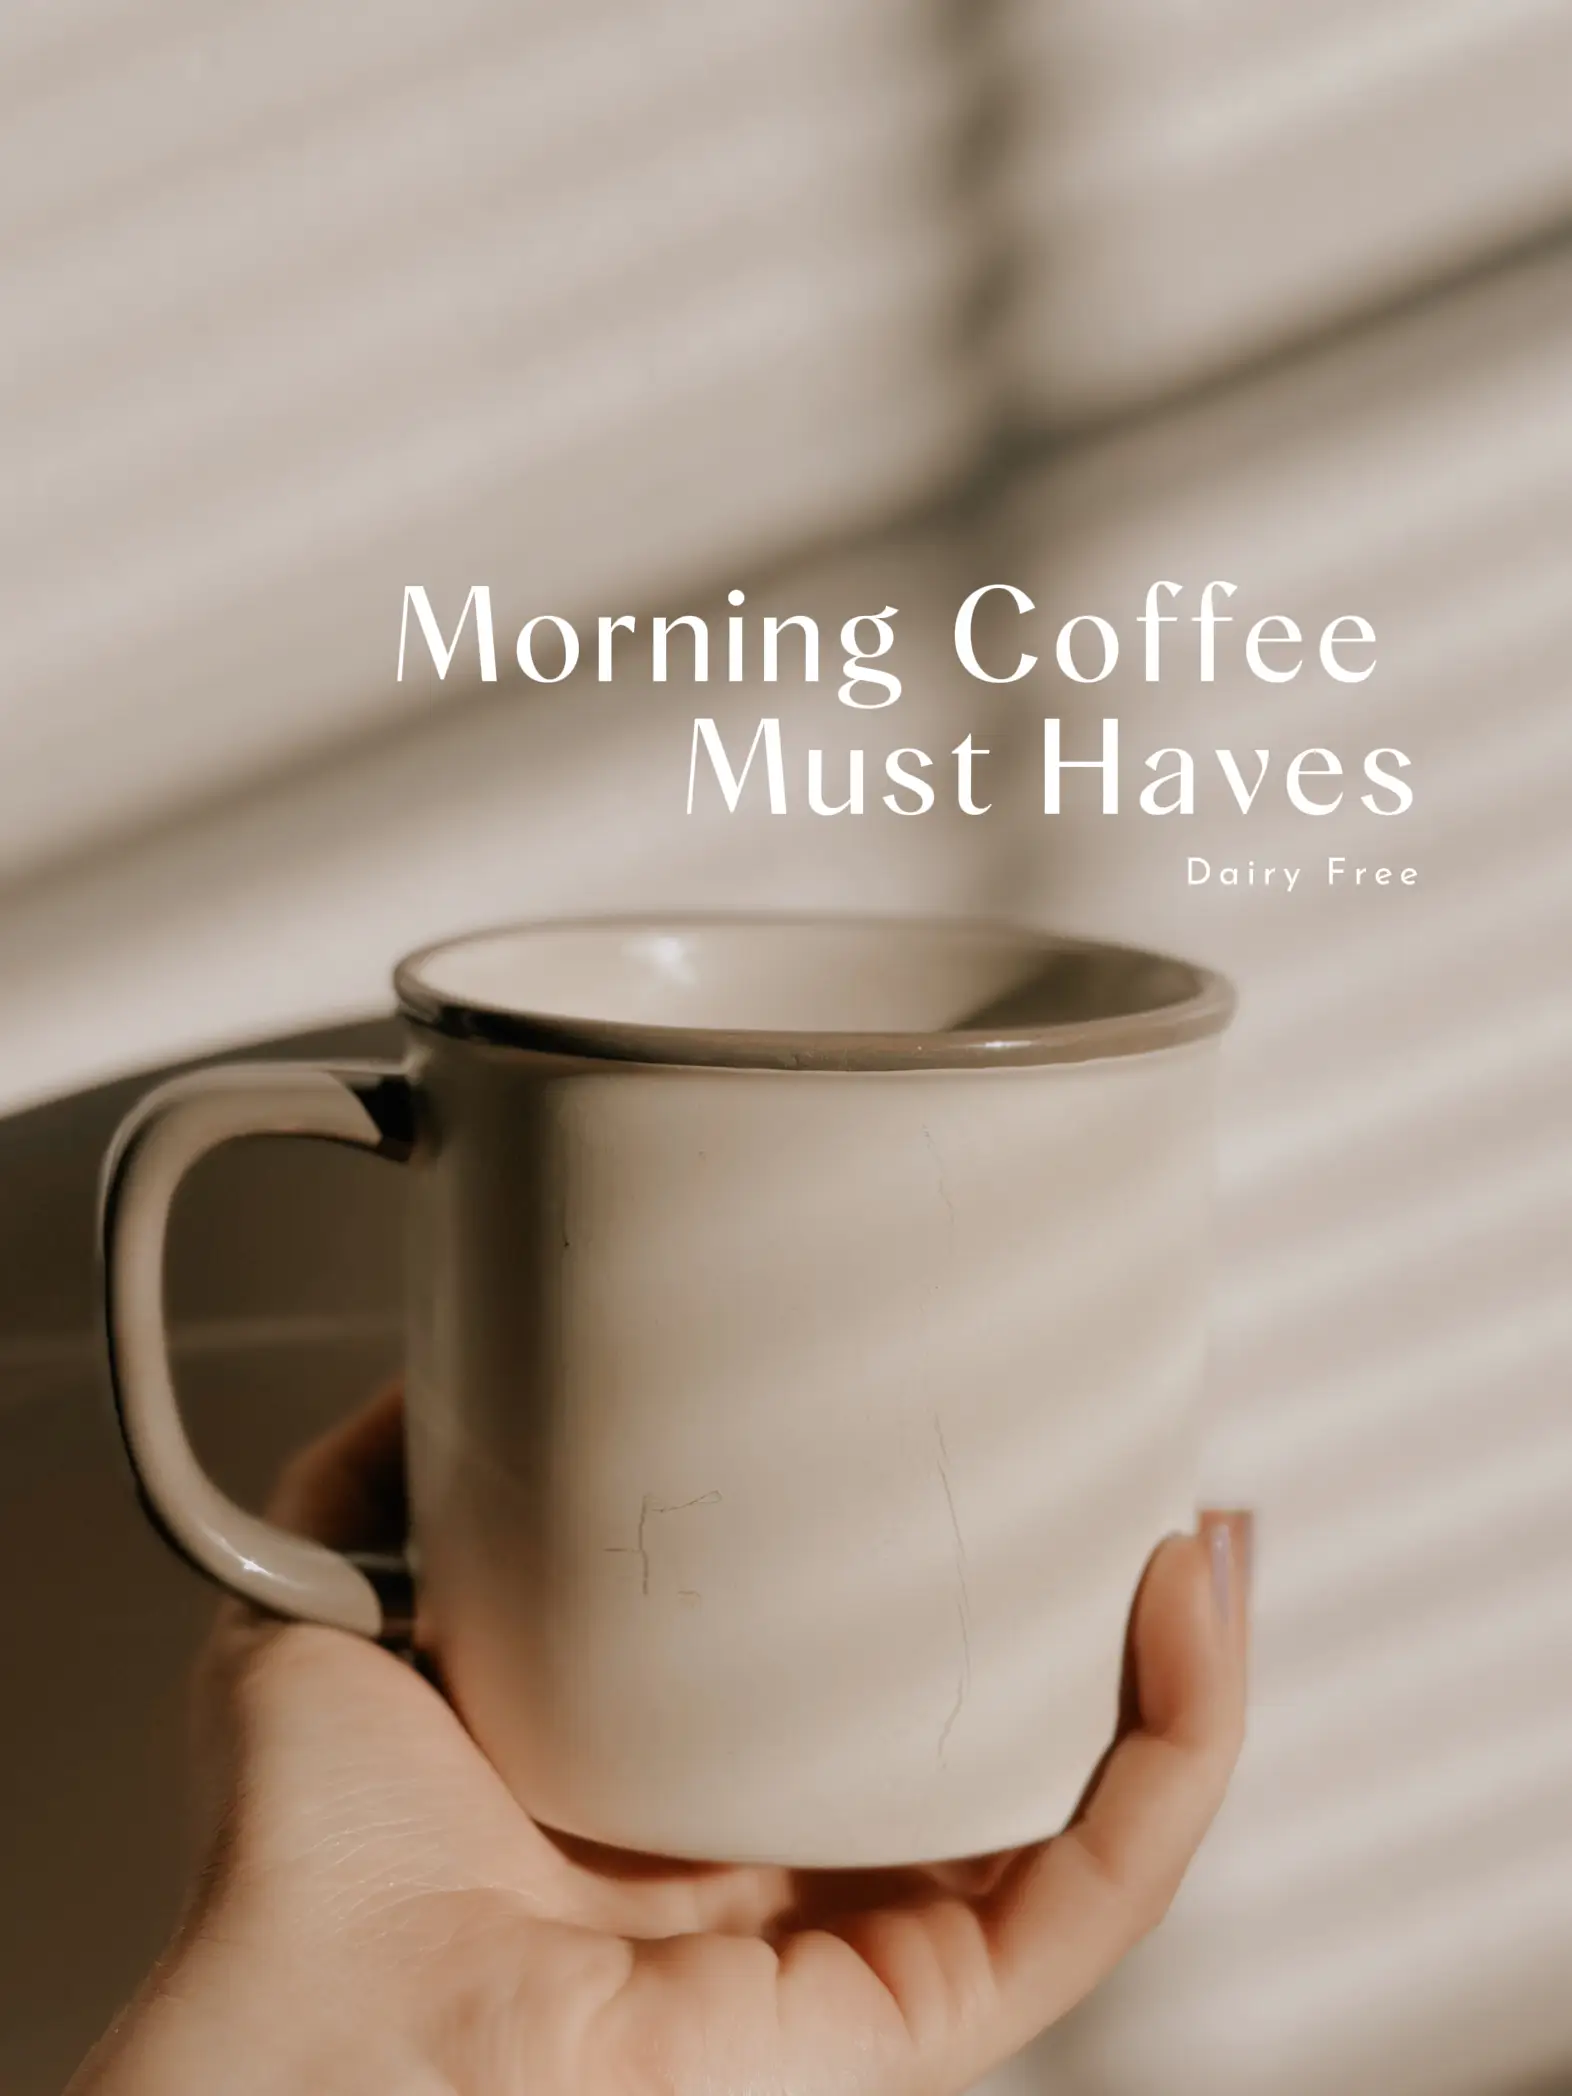 MORNING COFFEE MUST HAVES ☕️  Gallery posted by Leah Drumheller